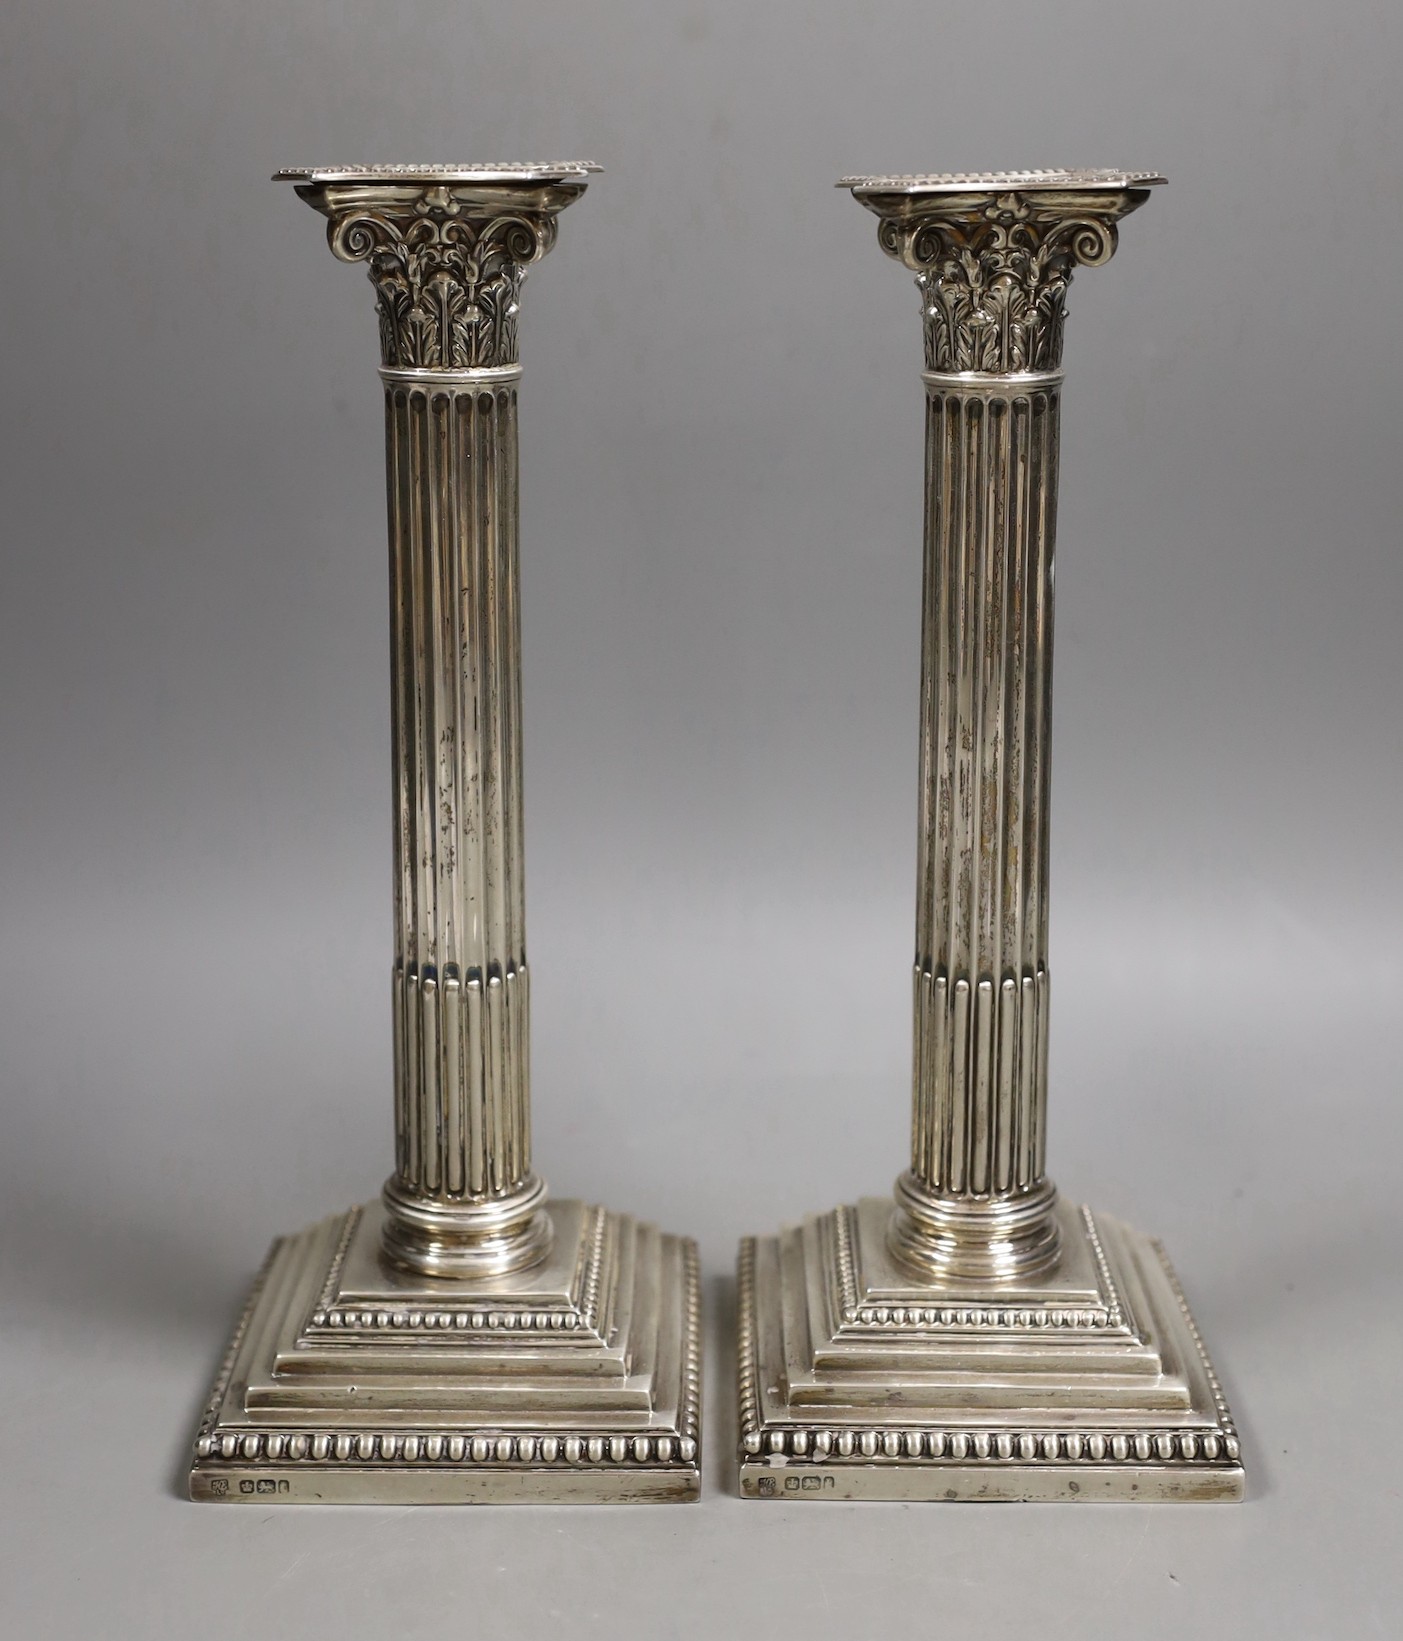 A pair of Edwardian silver Corinthian column candlesticks, Hawksworth, Eyre & Co, Sheffield, 1903, height 25.5cm, weighted.